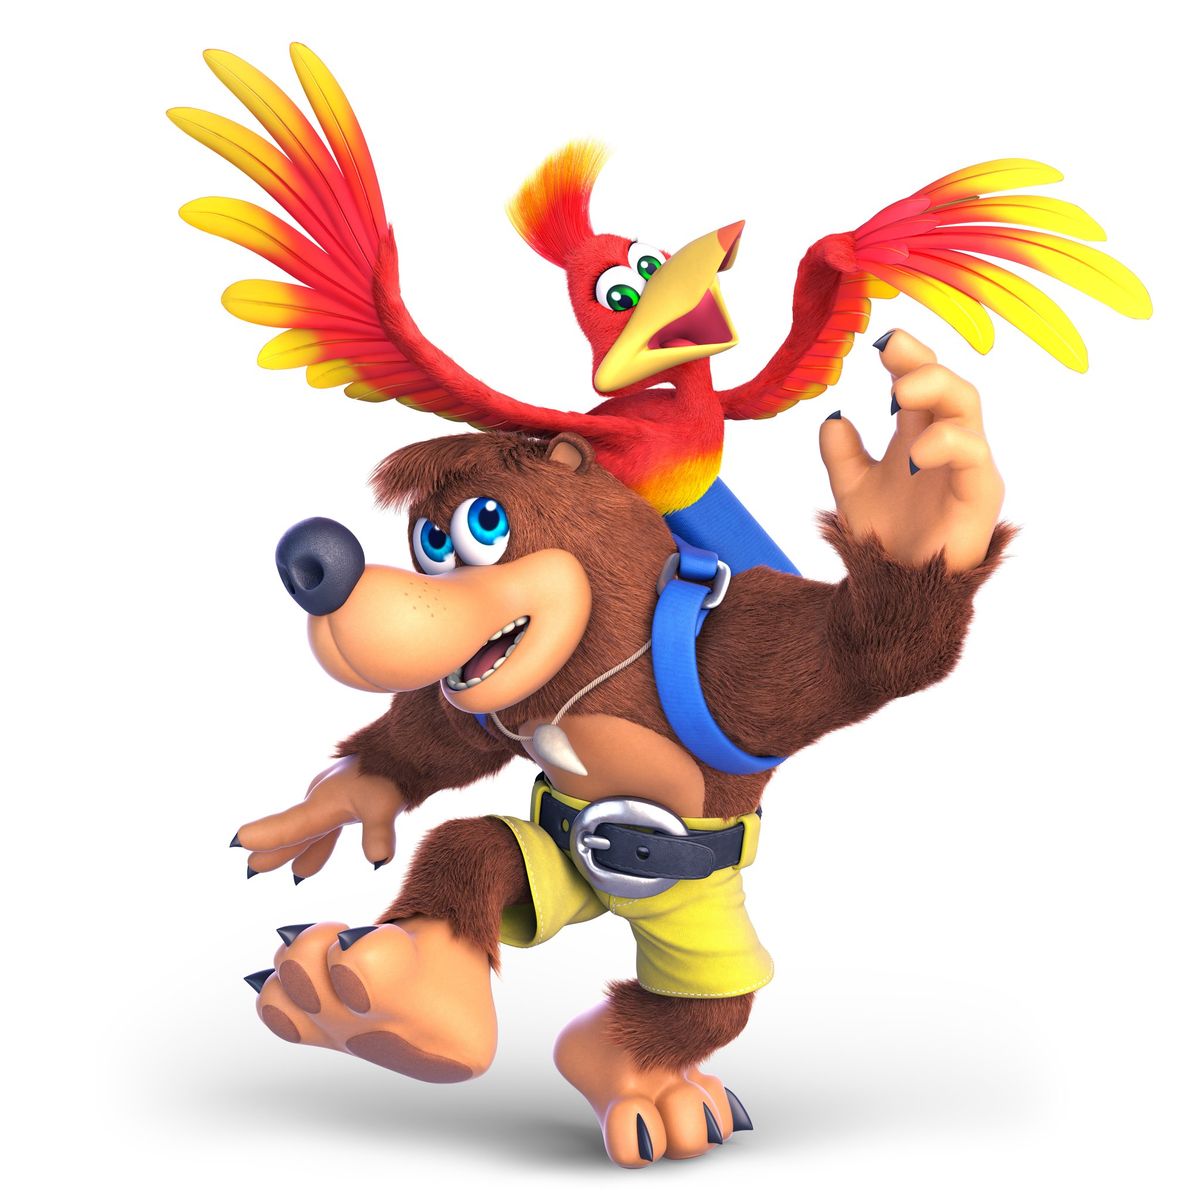 How to counter Banjo And Kazooie with Mario in Super Smash Bros. Ultimate